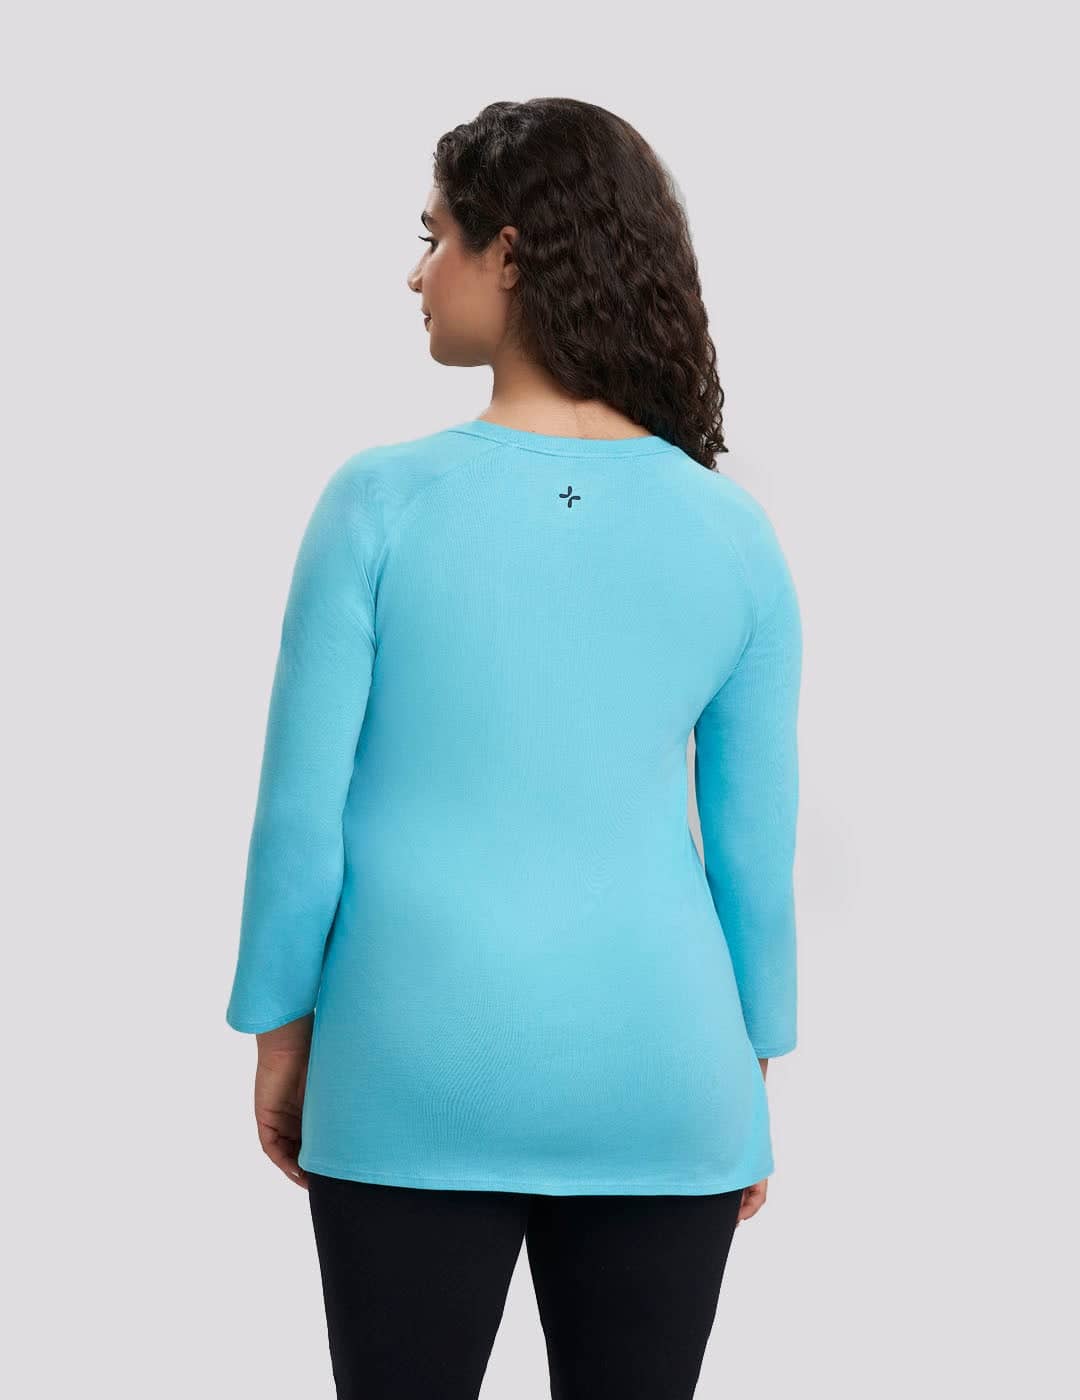 Womens Chest Port Access Teal 